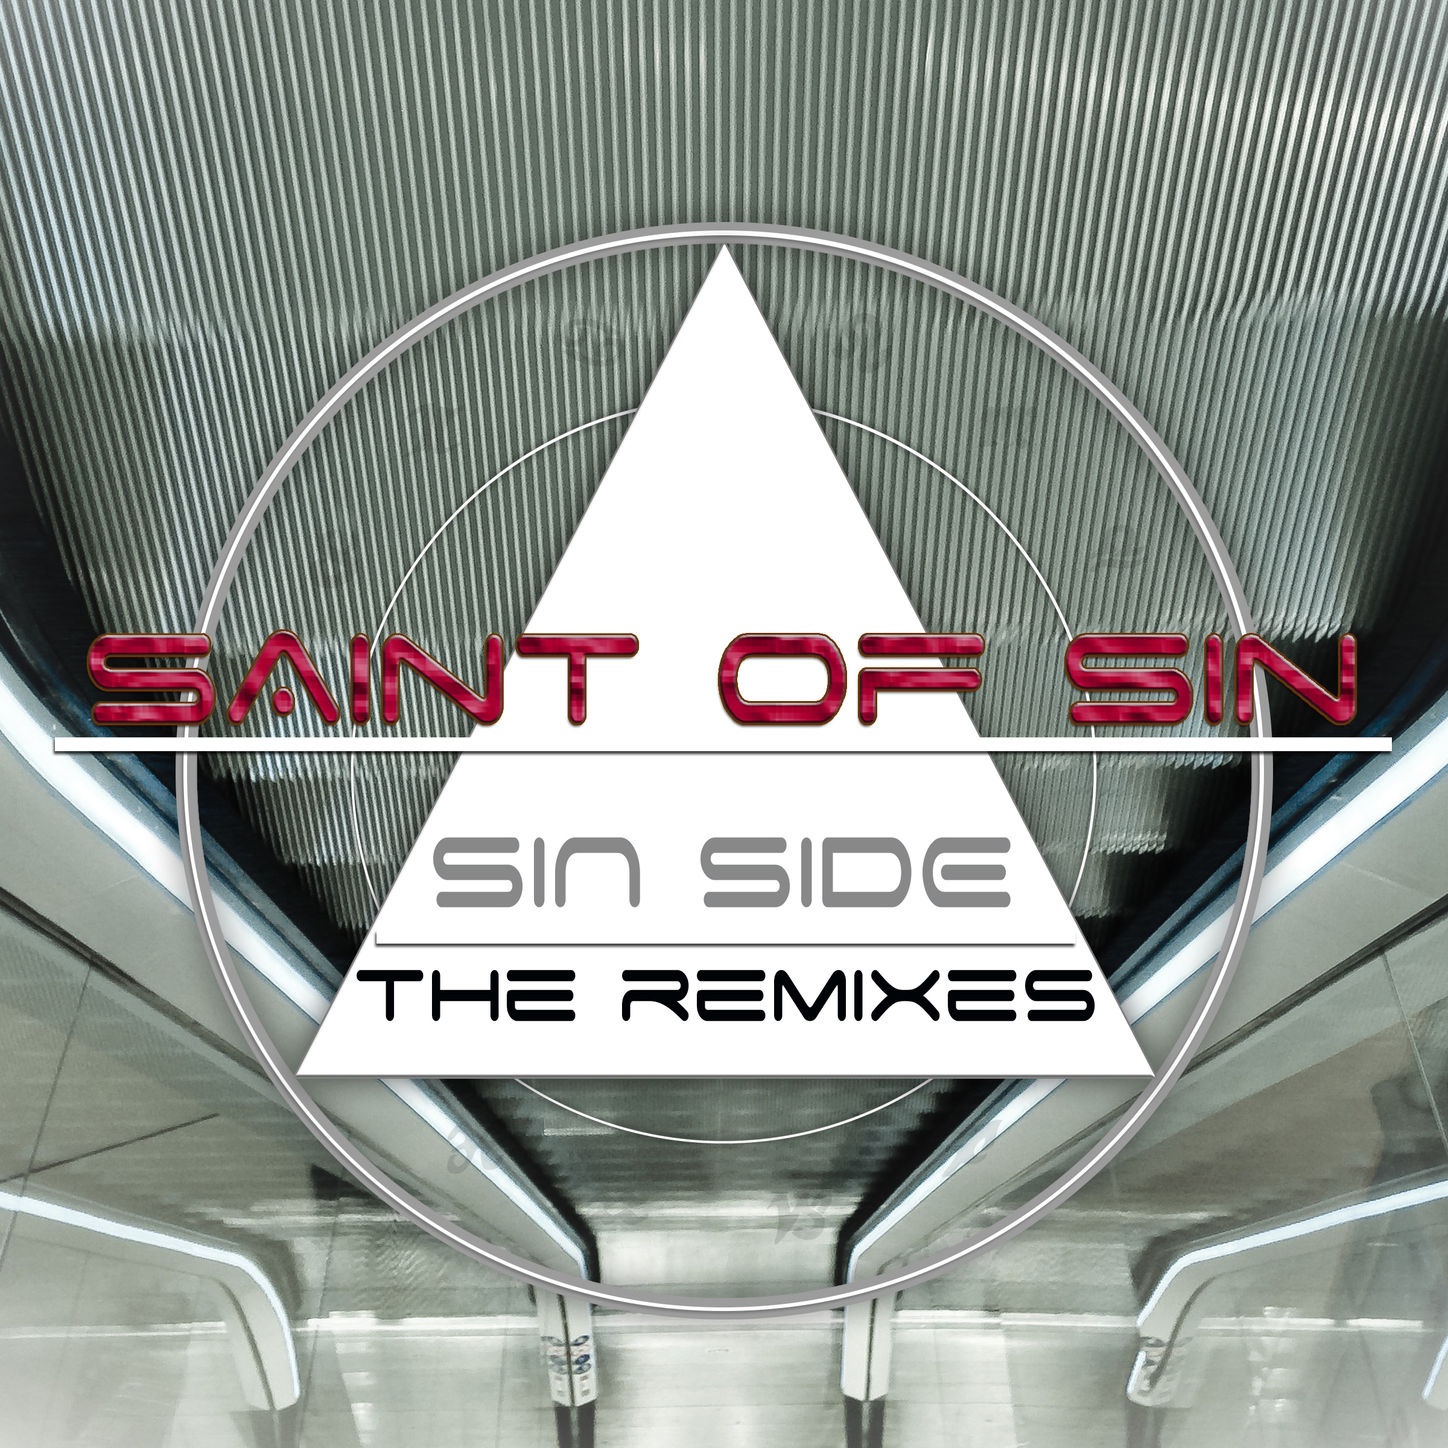 Song of Forgiveness (The Force Aka Peter Ries & K.C. Radio Mix)